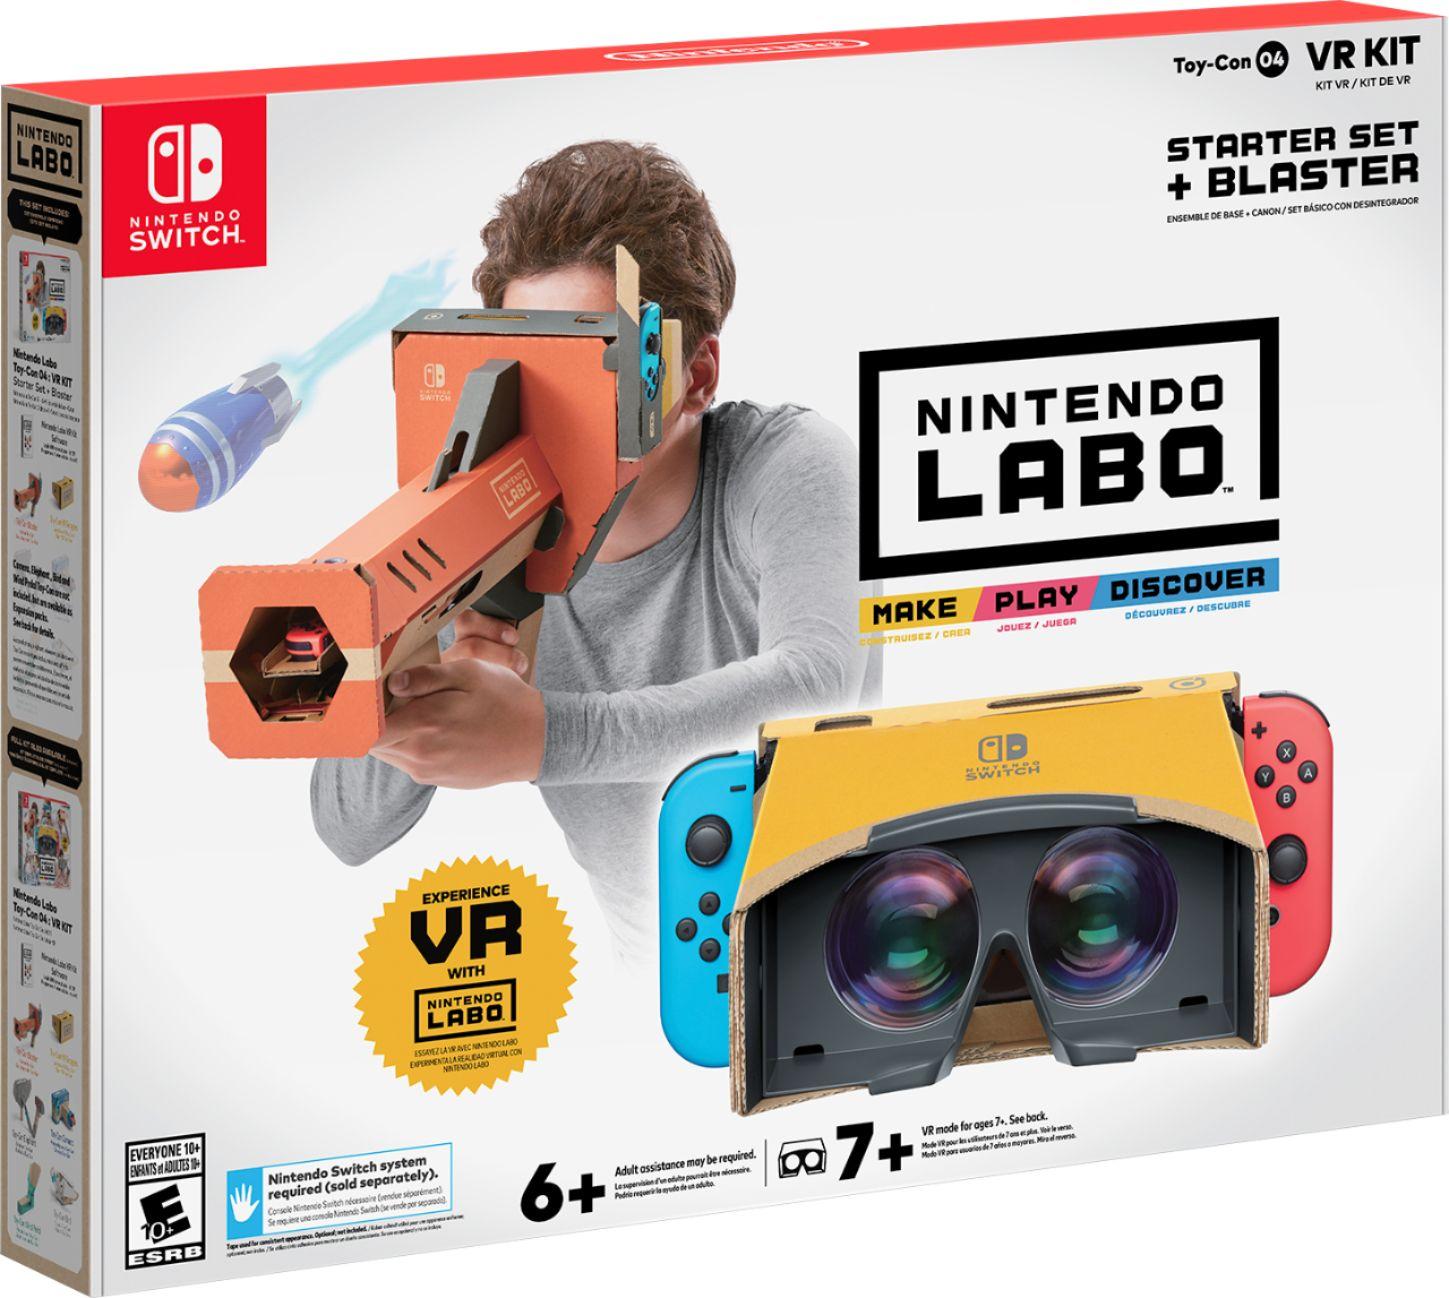 Nintendo Switch Labo Toy-Con 04 VR Kit with Starter Set for $19.99